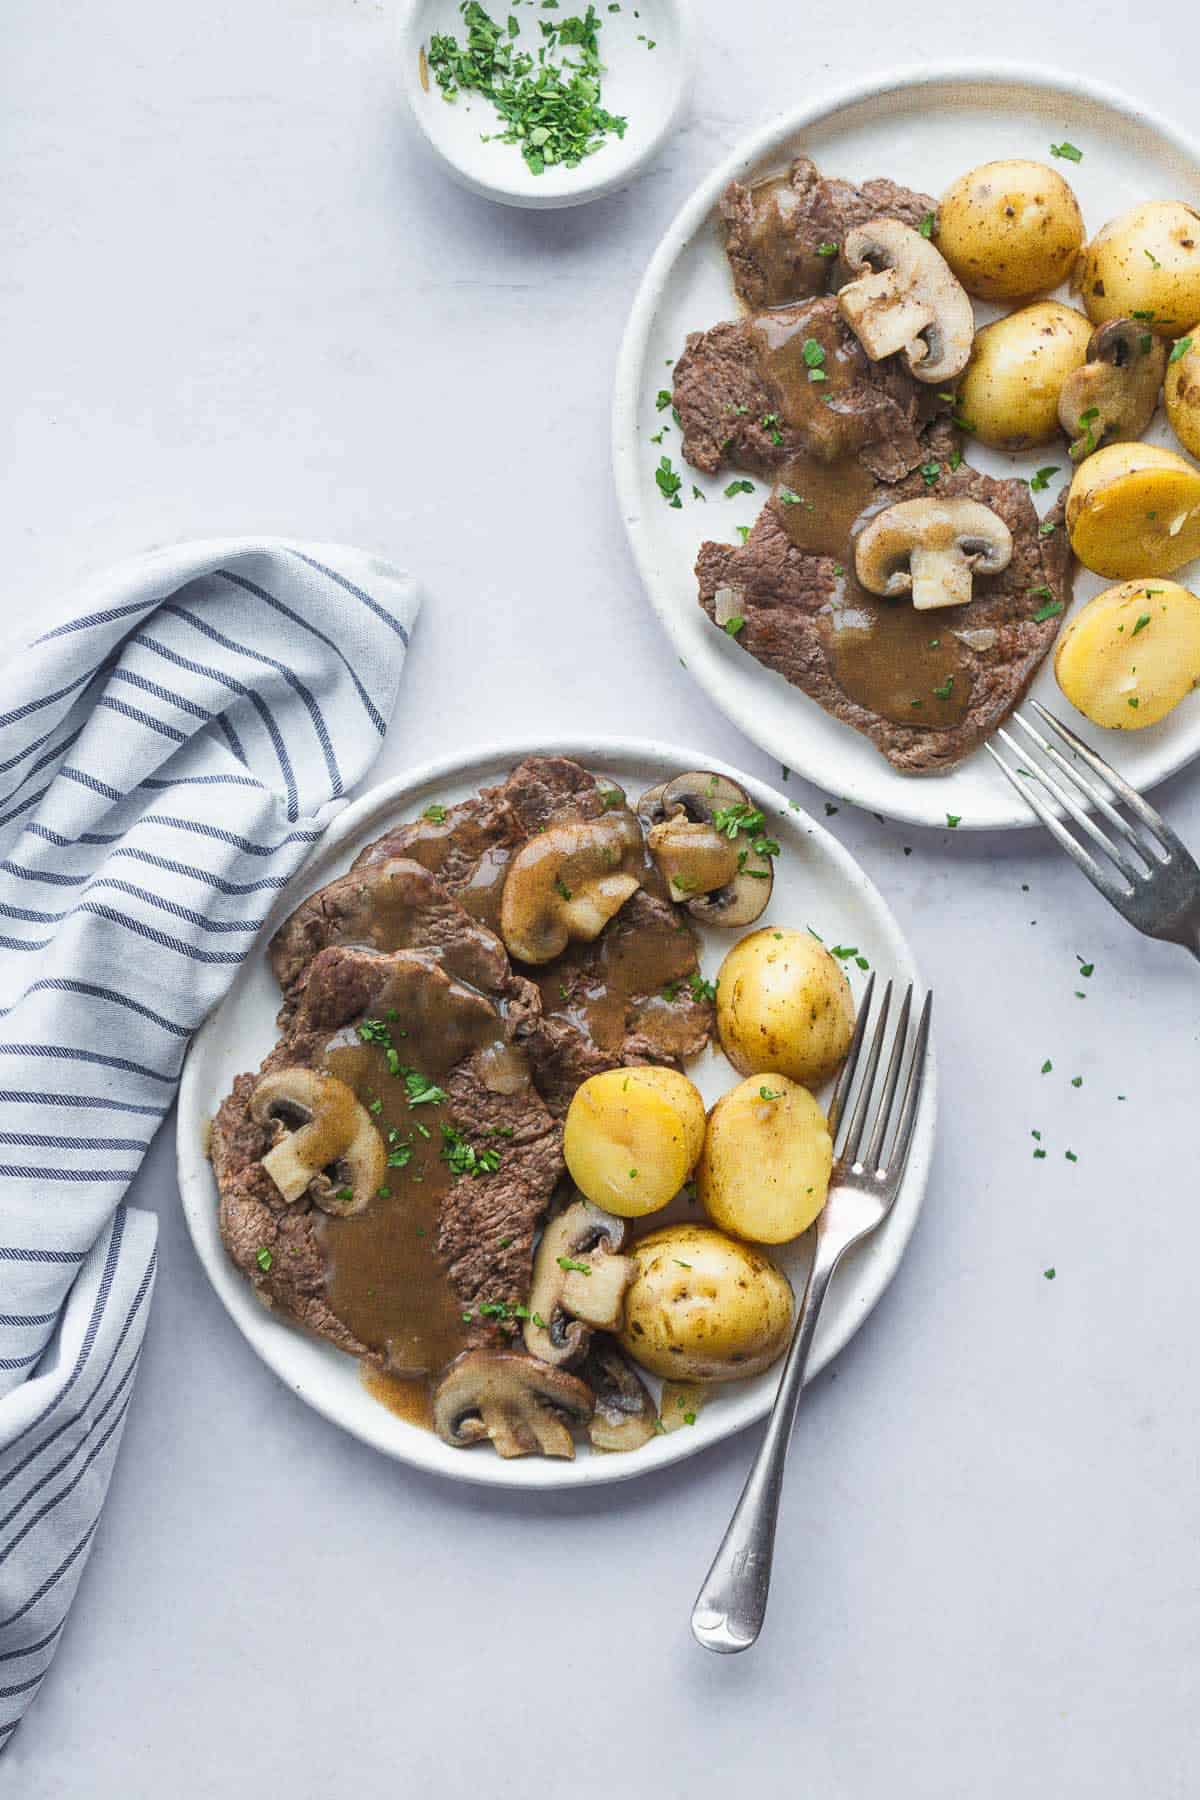 2 white plates with served Instant Pot cube steak, baby potatoes, and mushrooms